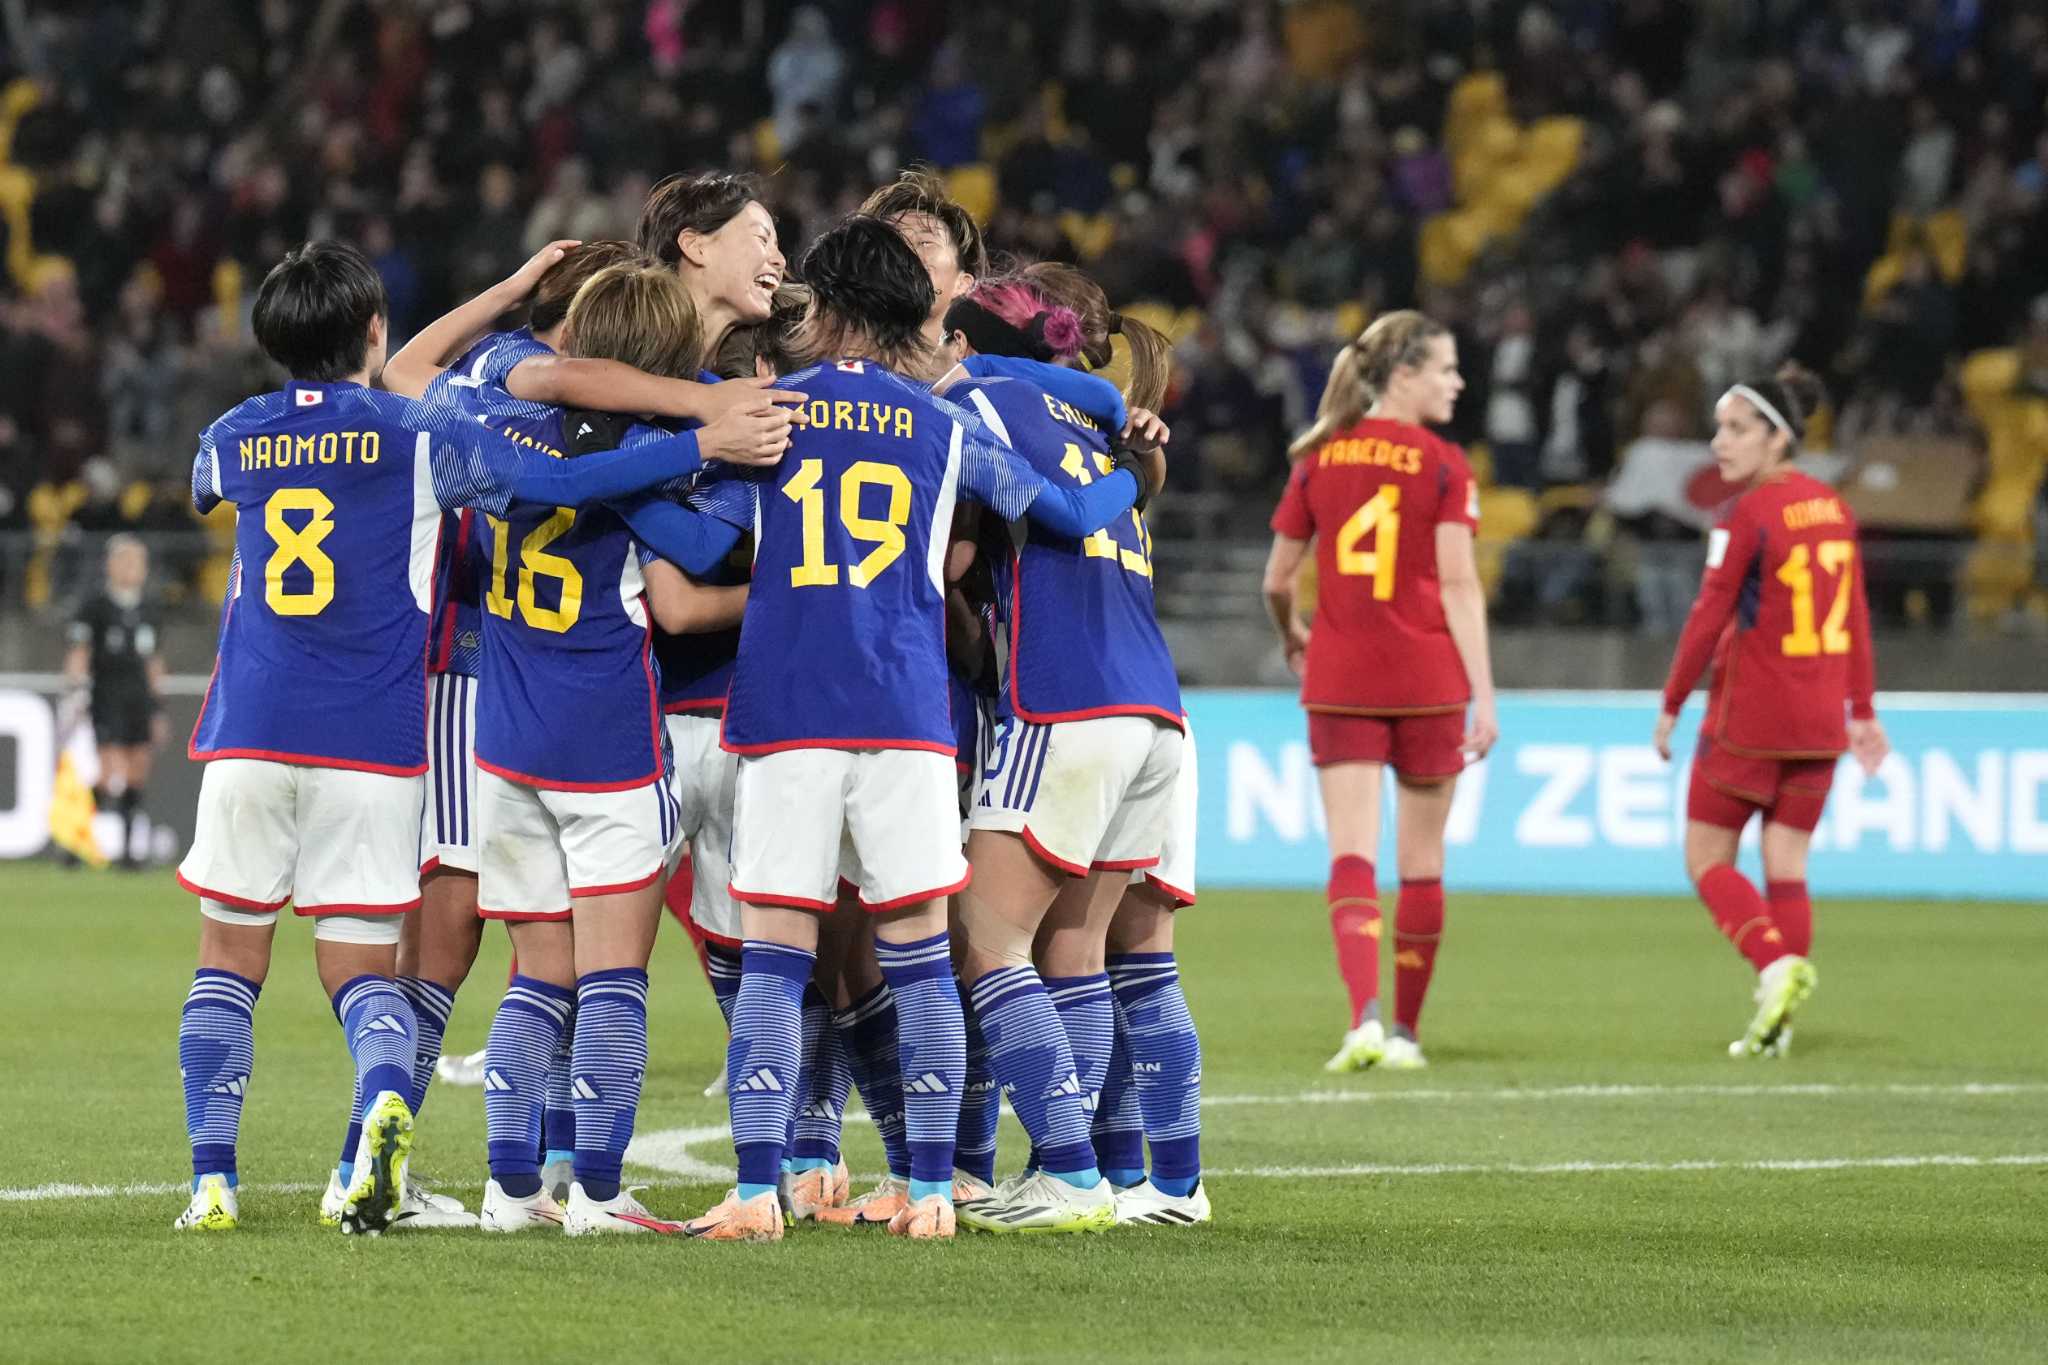 Japan trounces Spain 4-0 to top Group C at Women’s World Cup